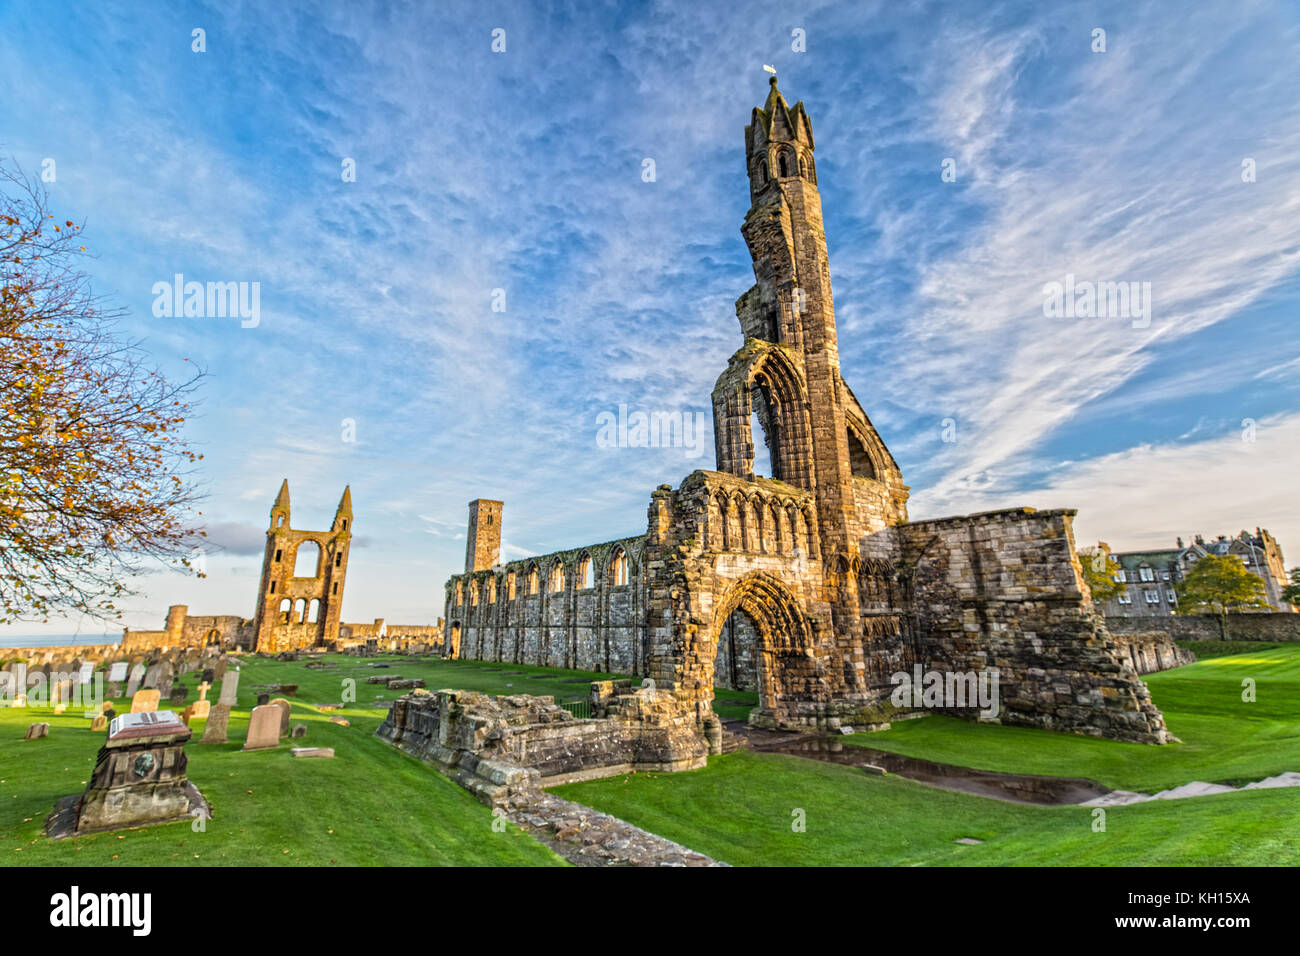 Cattedrale di St Andrews a St. Andrews, Scozia Foto Stock